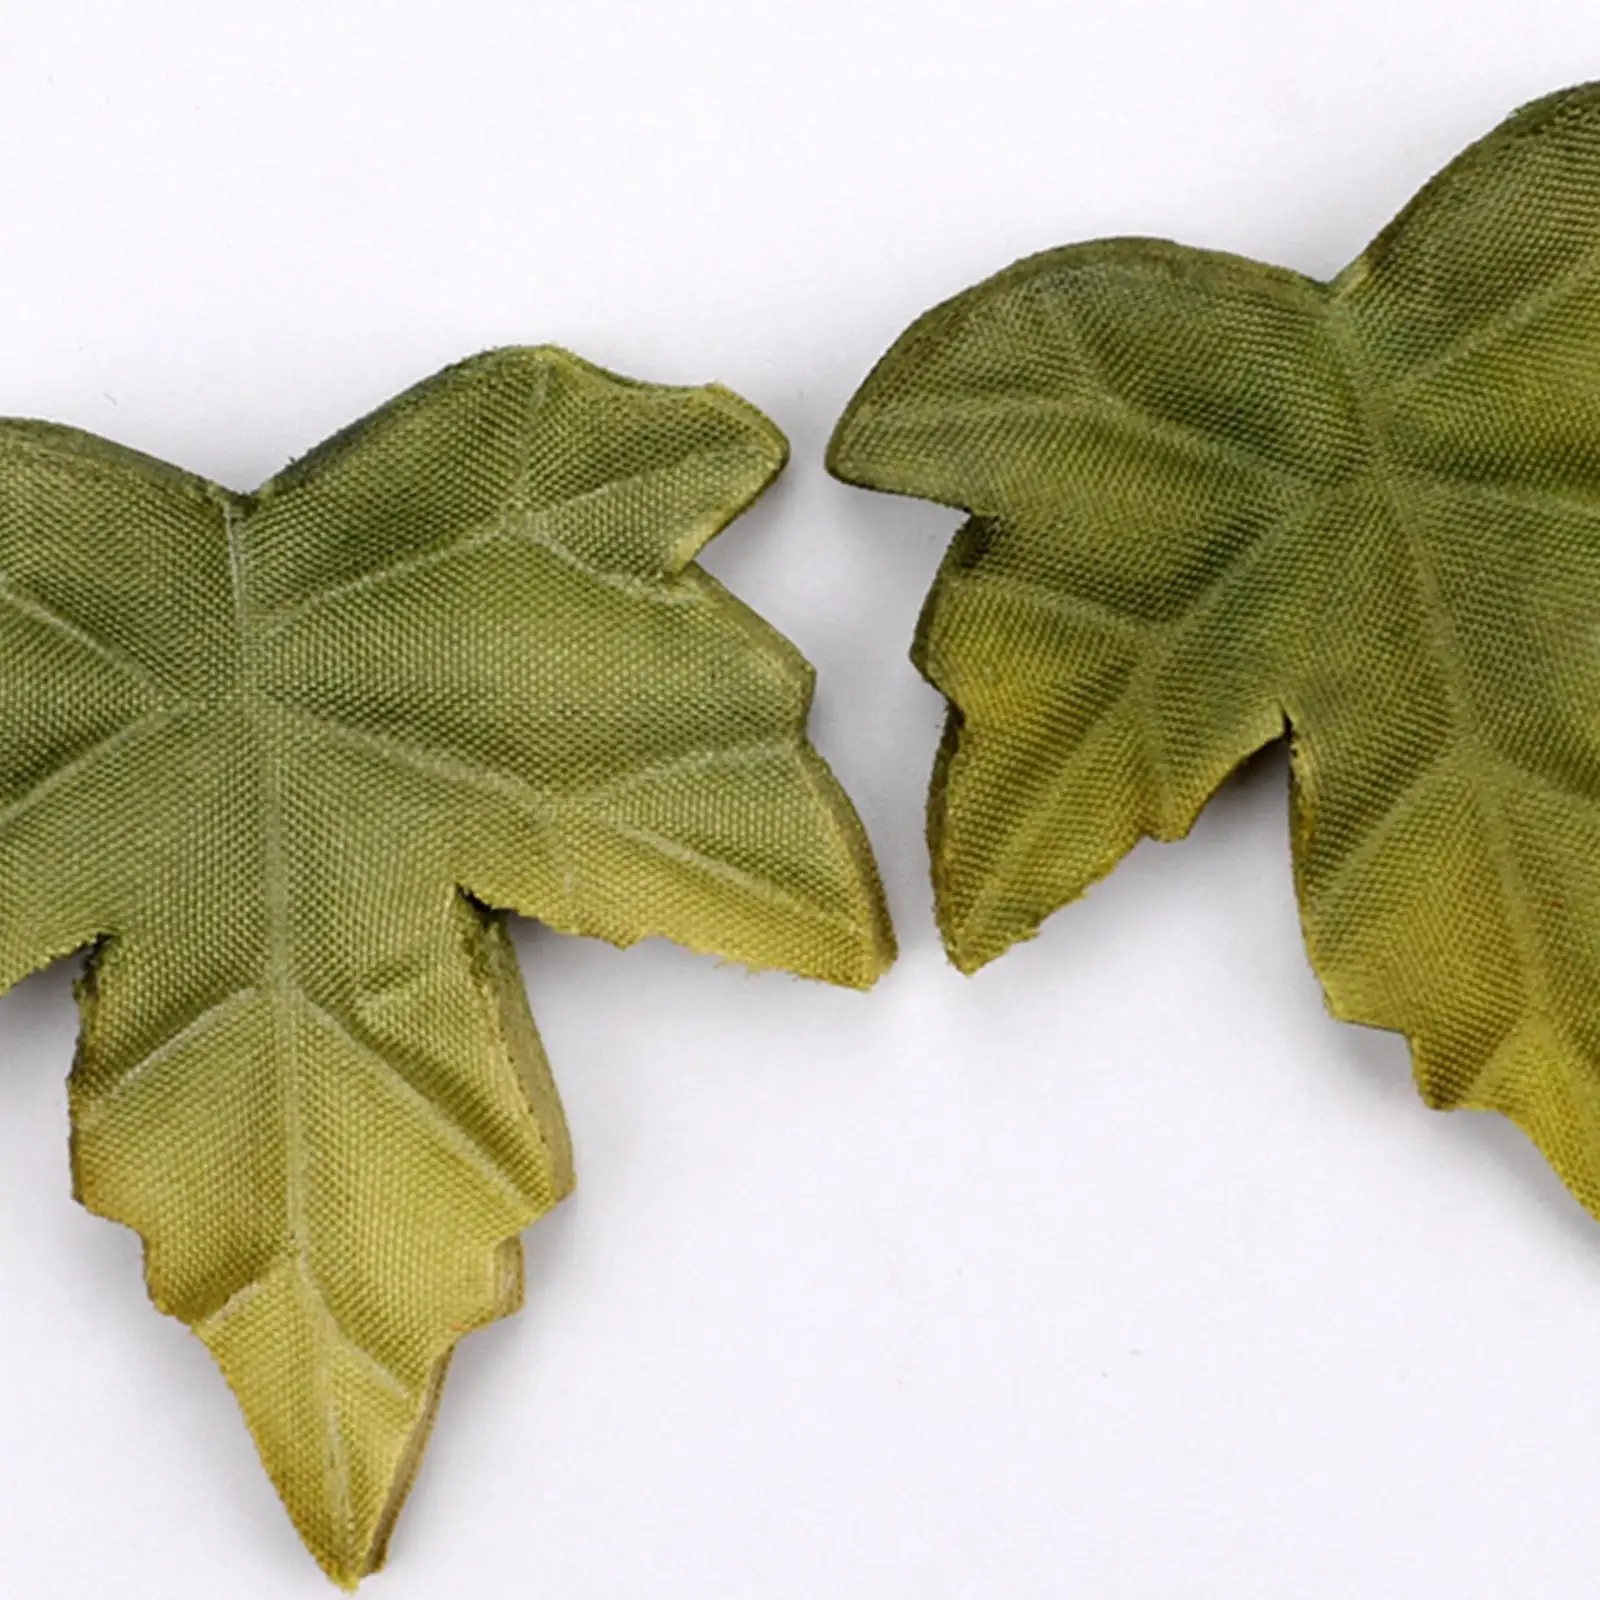 200x Artificial Maple Leaves DIY Craft Making Decorative Maple Leaf for Table Centerpieces Scrapbooking Party Wedding Decoration